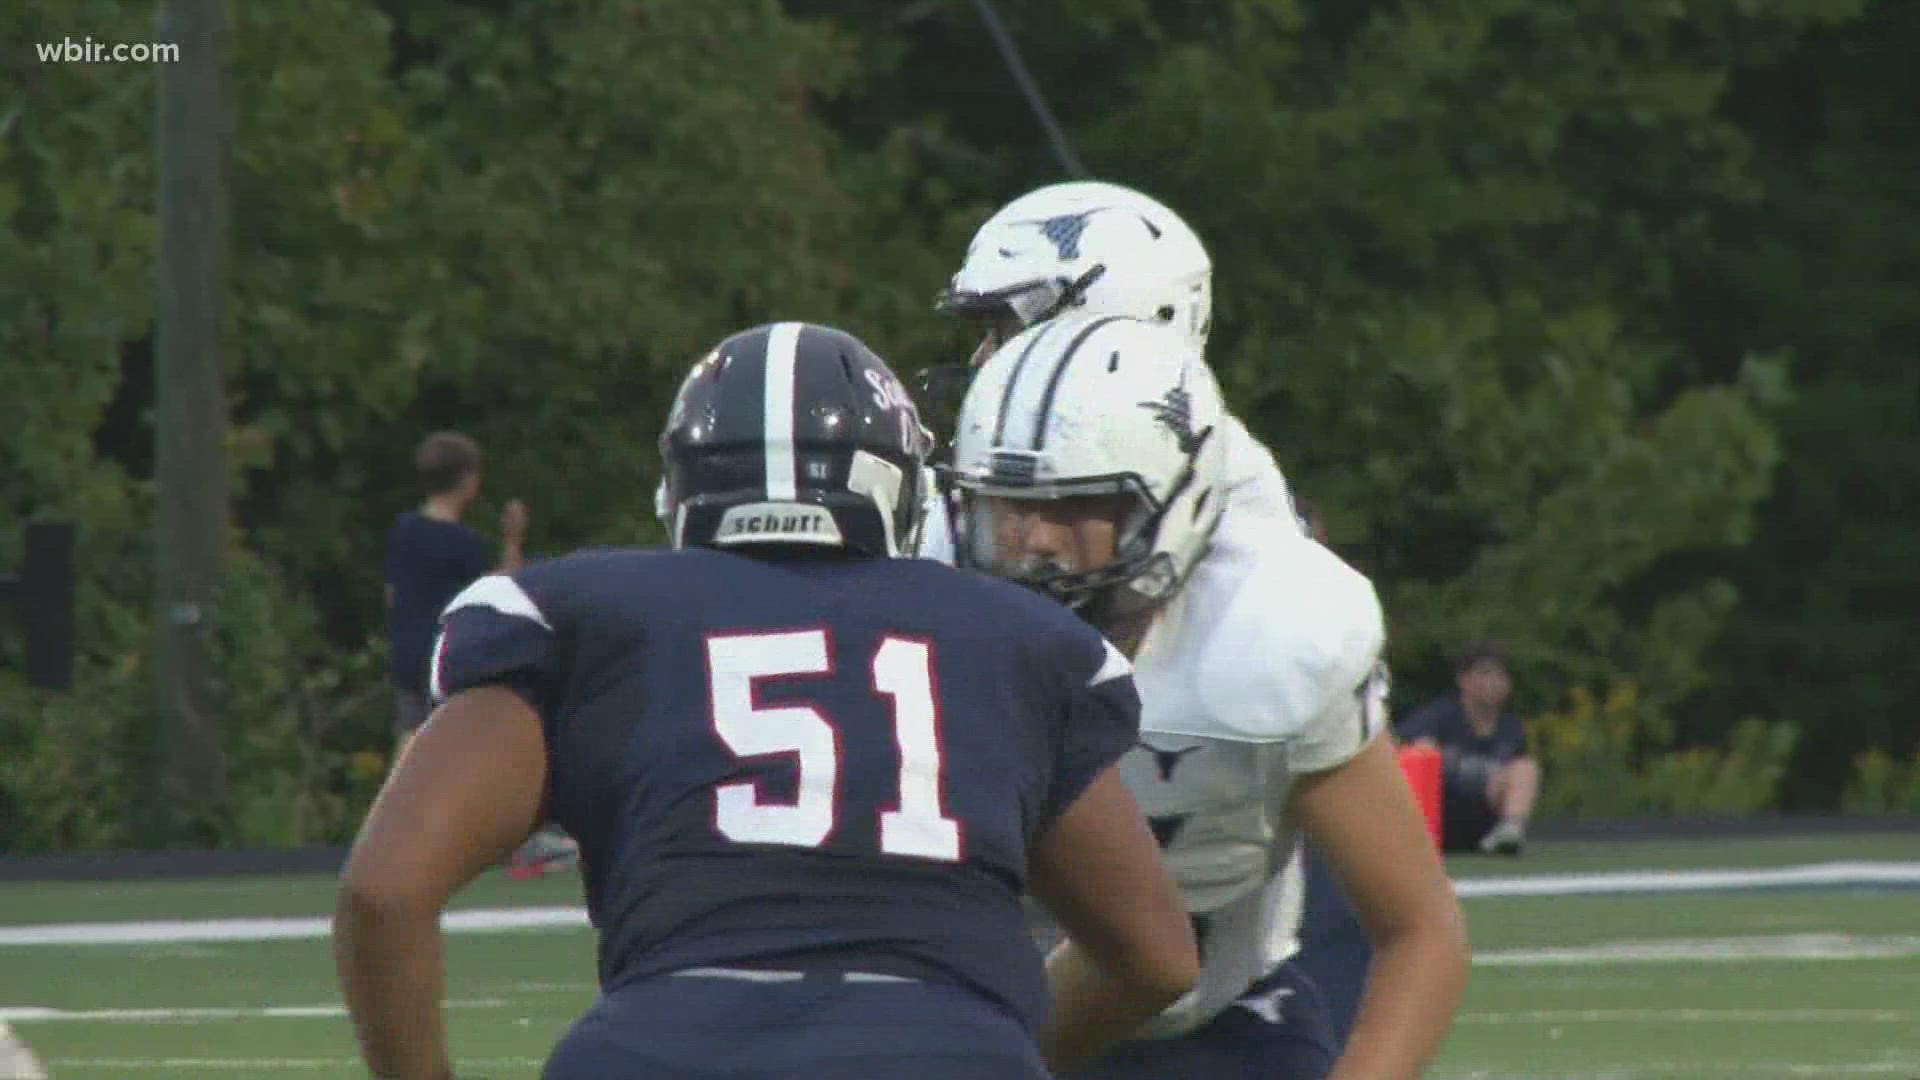 Anderson County knocks off South-Doyle in week 5 action.